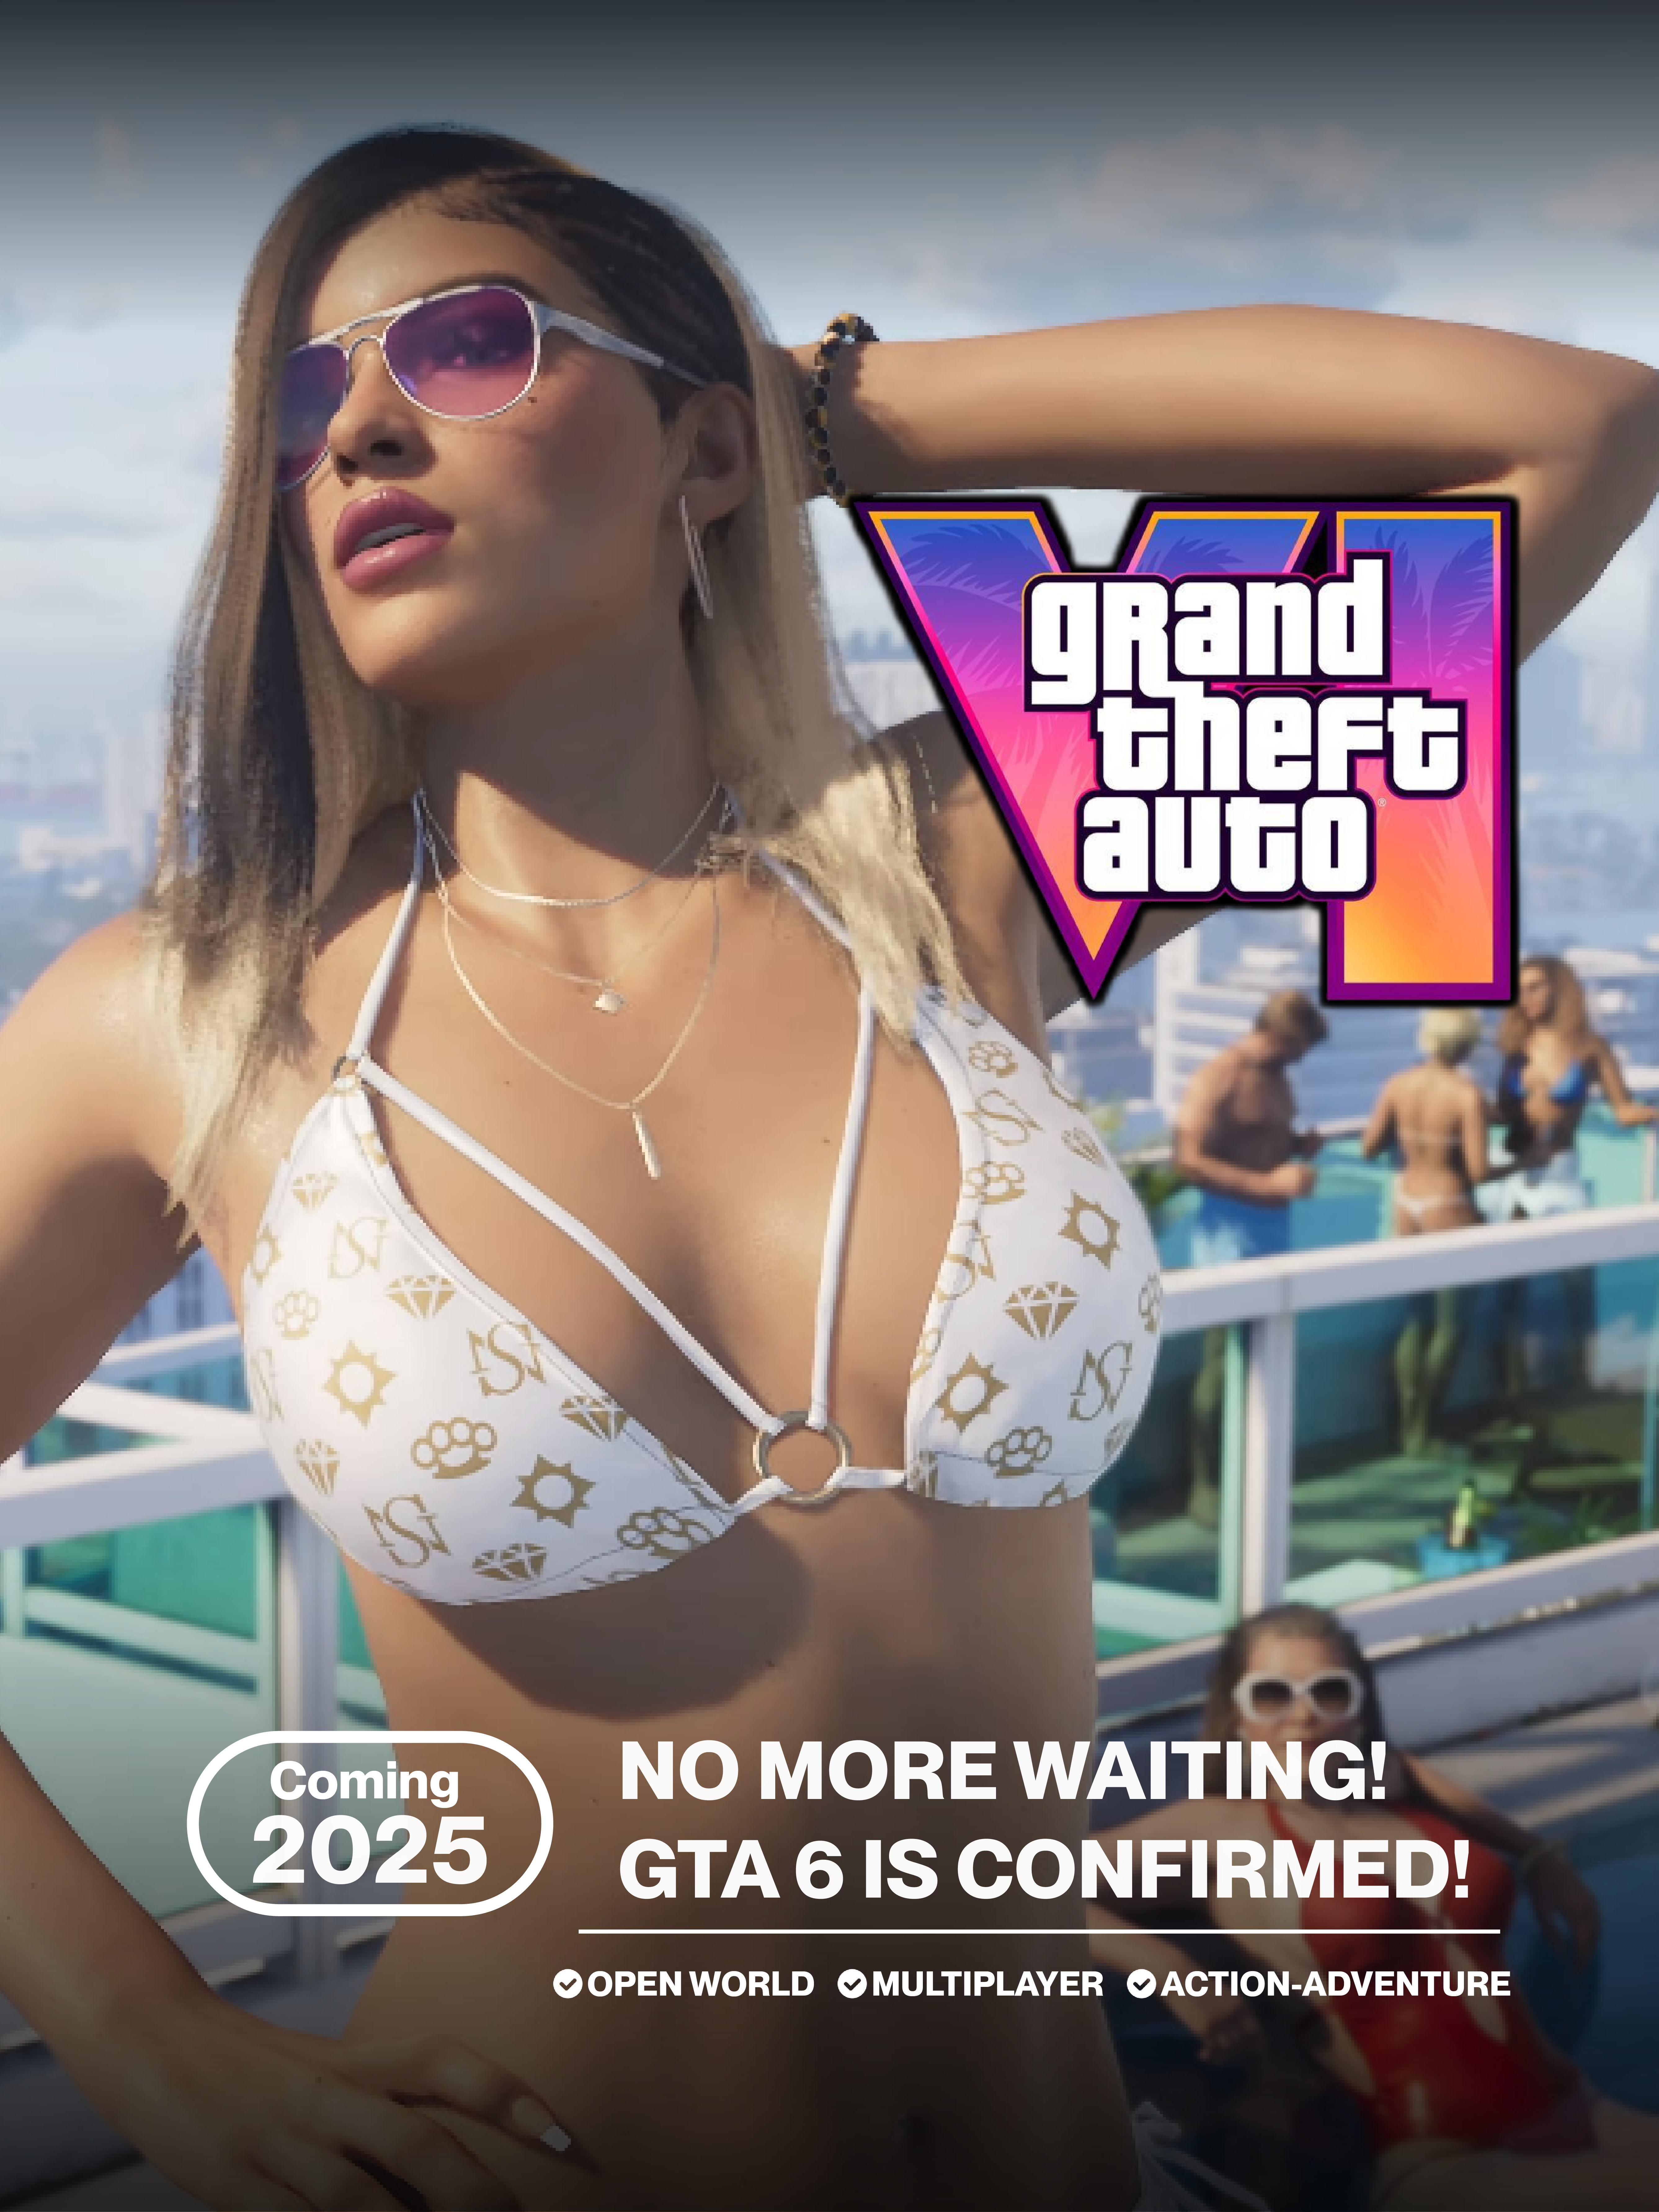 WAIT... GTA 6 IS GOING TO BE CONSOLE EXCLUSIVE!? NO!